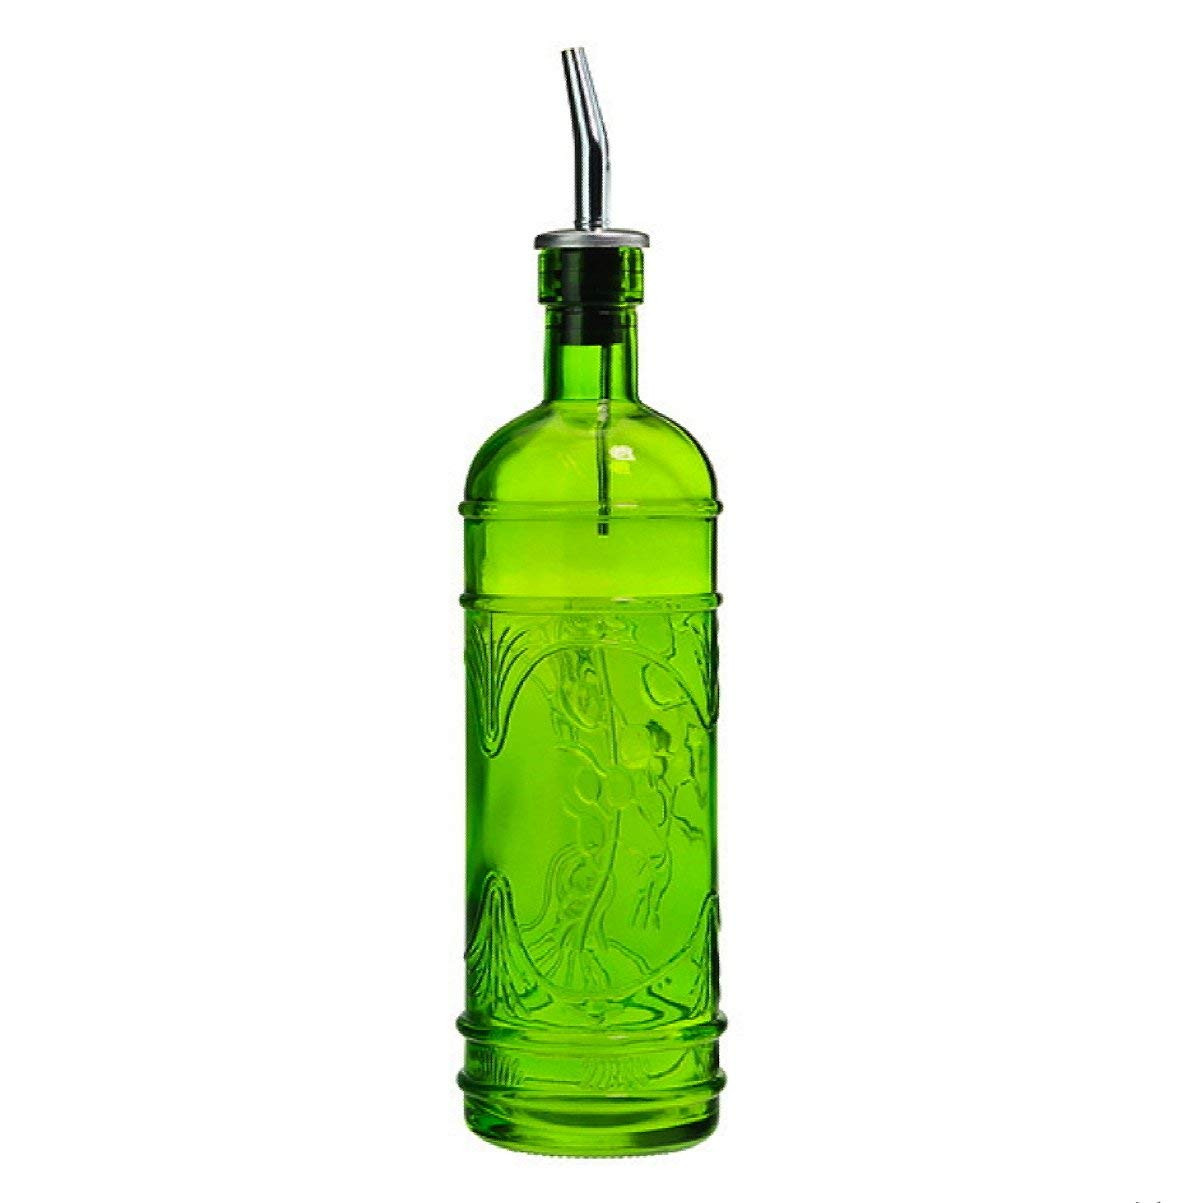 22 Wonderful Recycled Glass Bottle Vase 2024 free download recycled glass bottle vase of amazon com unique kitchen olive oil liquid dish or hand soap glass with amazon com unique kitchen olive oil liquid dish or hand soap glass bottle dispenser g244